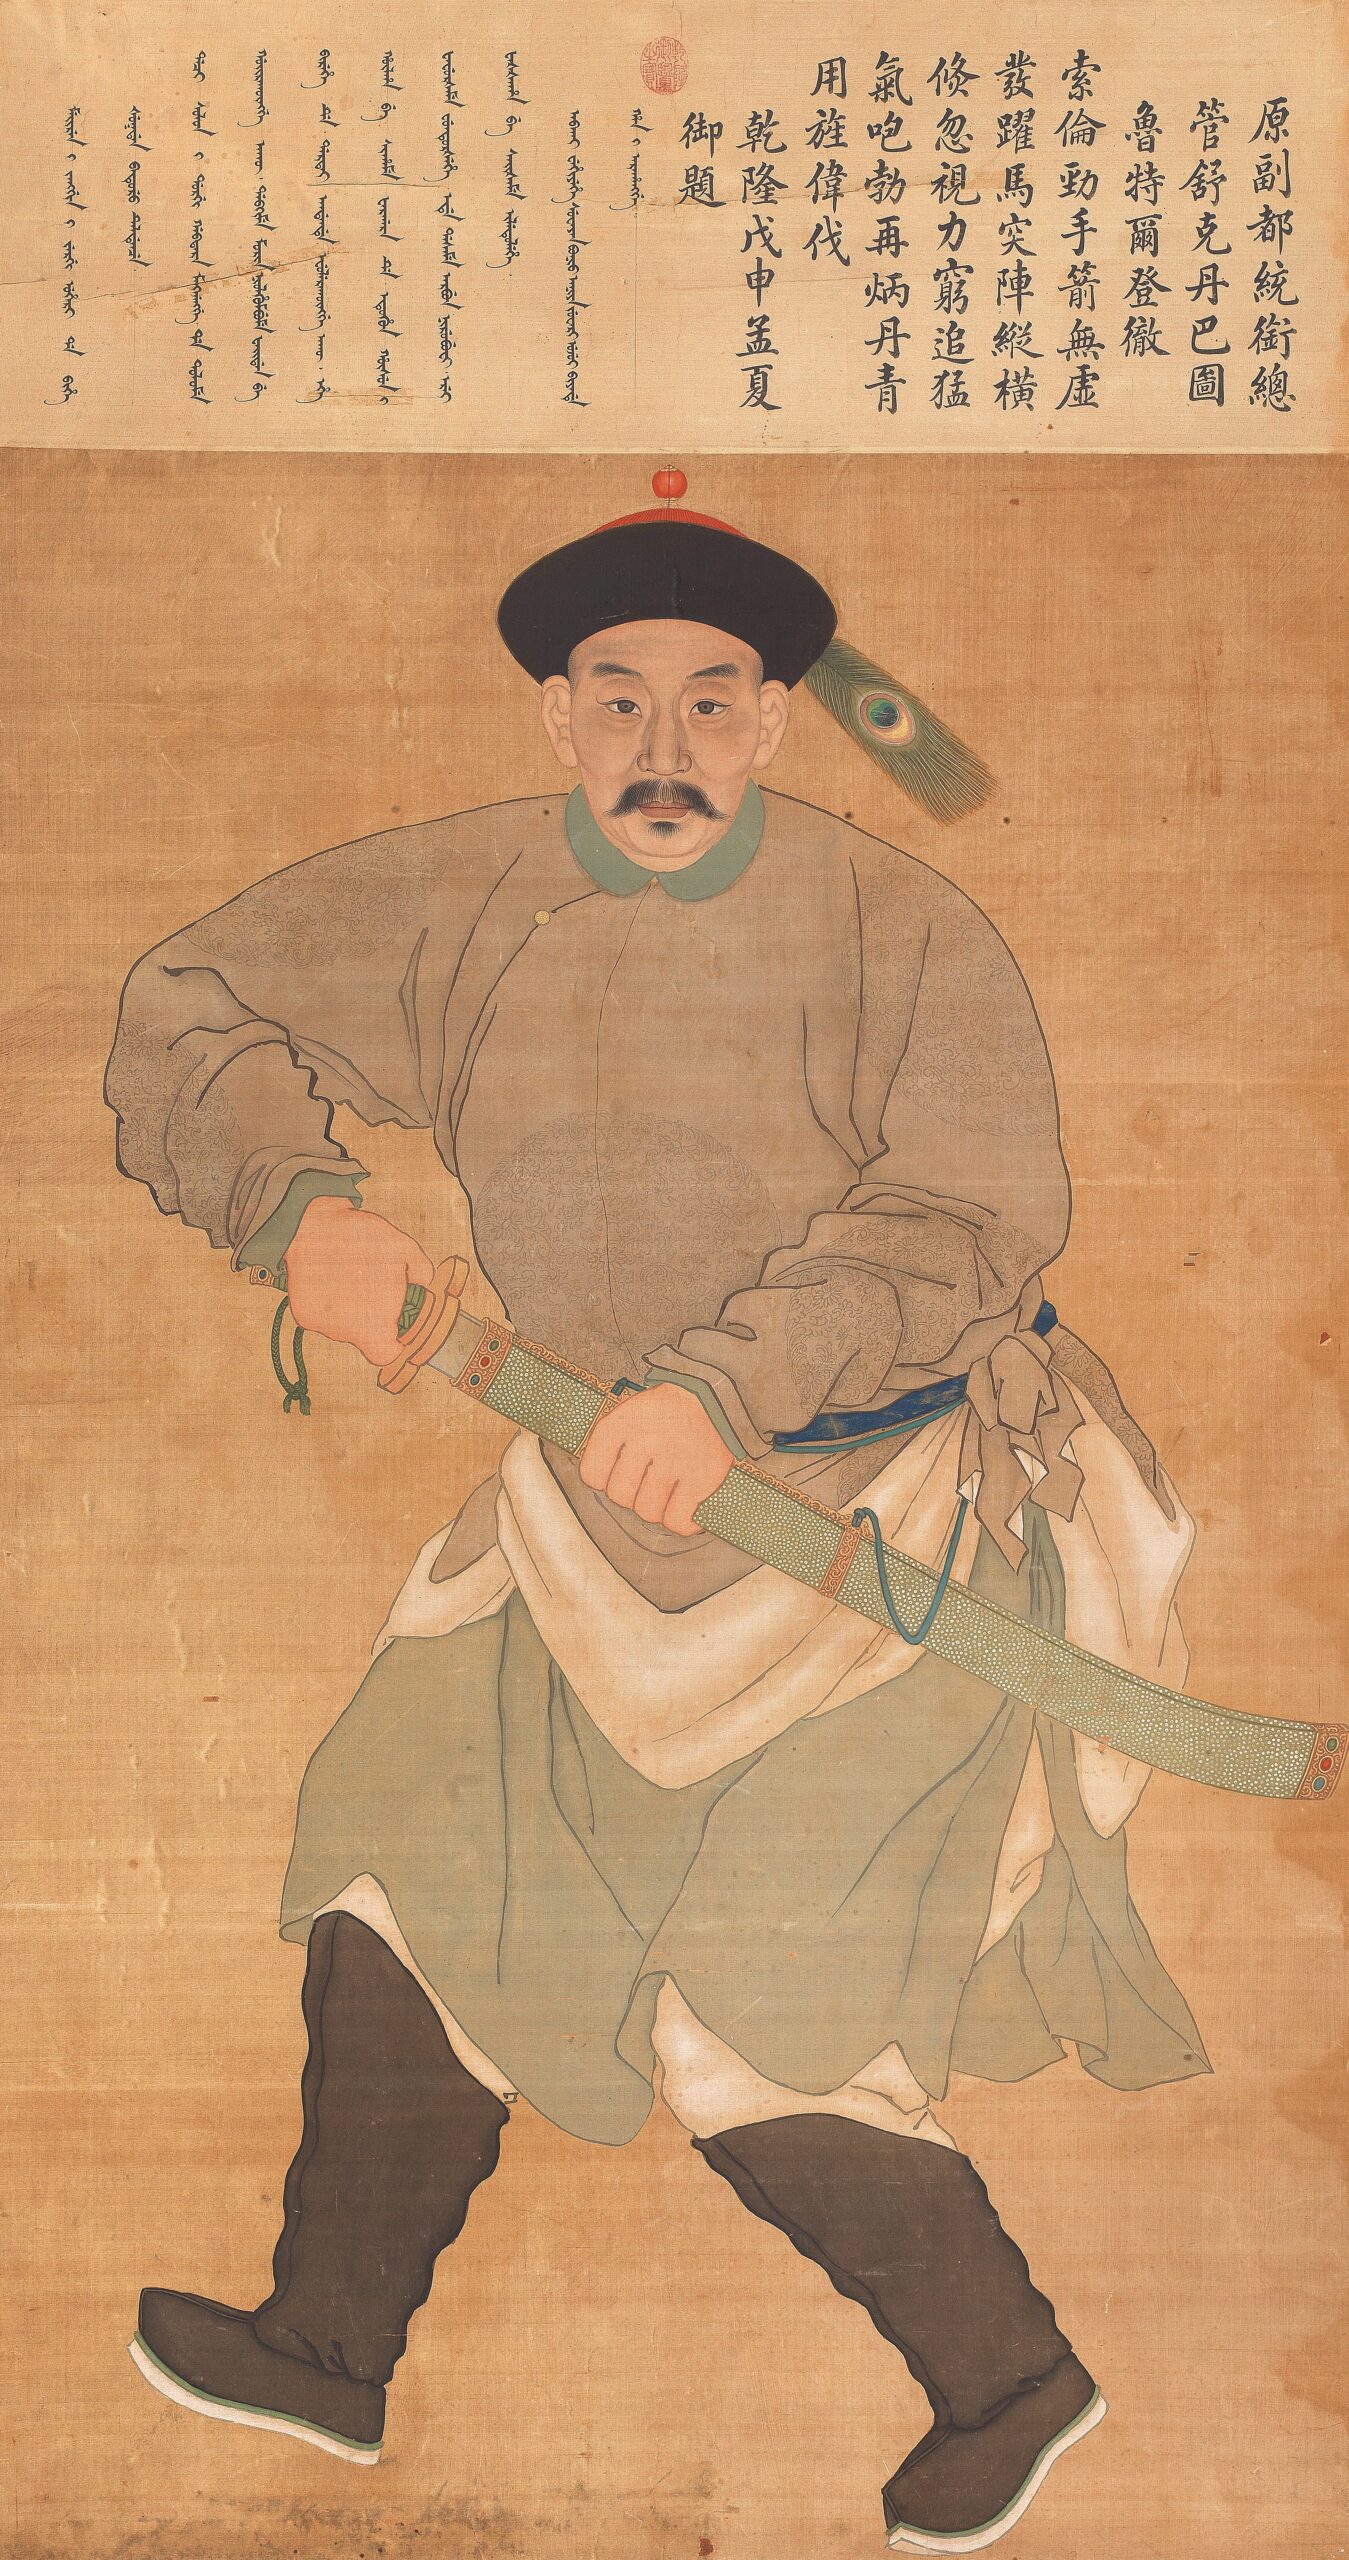 A RARE AND IMPORTANT IMPERIAL COURT PAINTING OF THE BANNERMAN TE'ER DENG CHE Qianlong, dated by inscription to the Wushen year, corresponding to 1788 and of the period